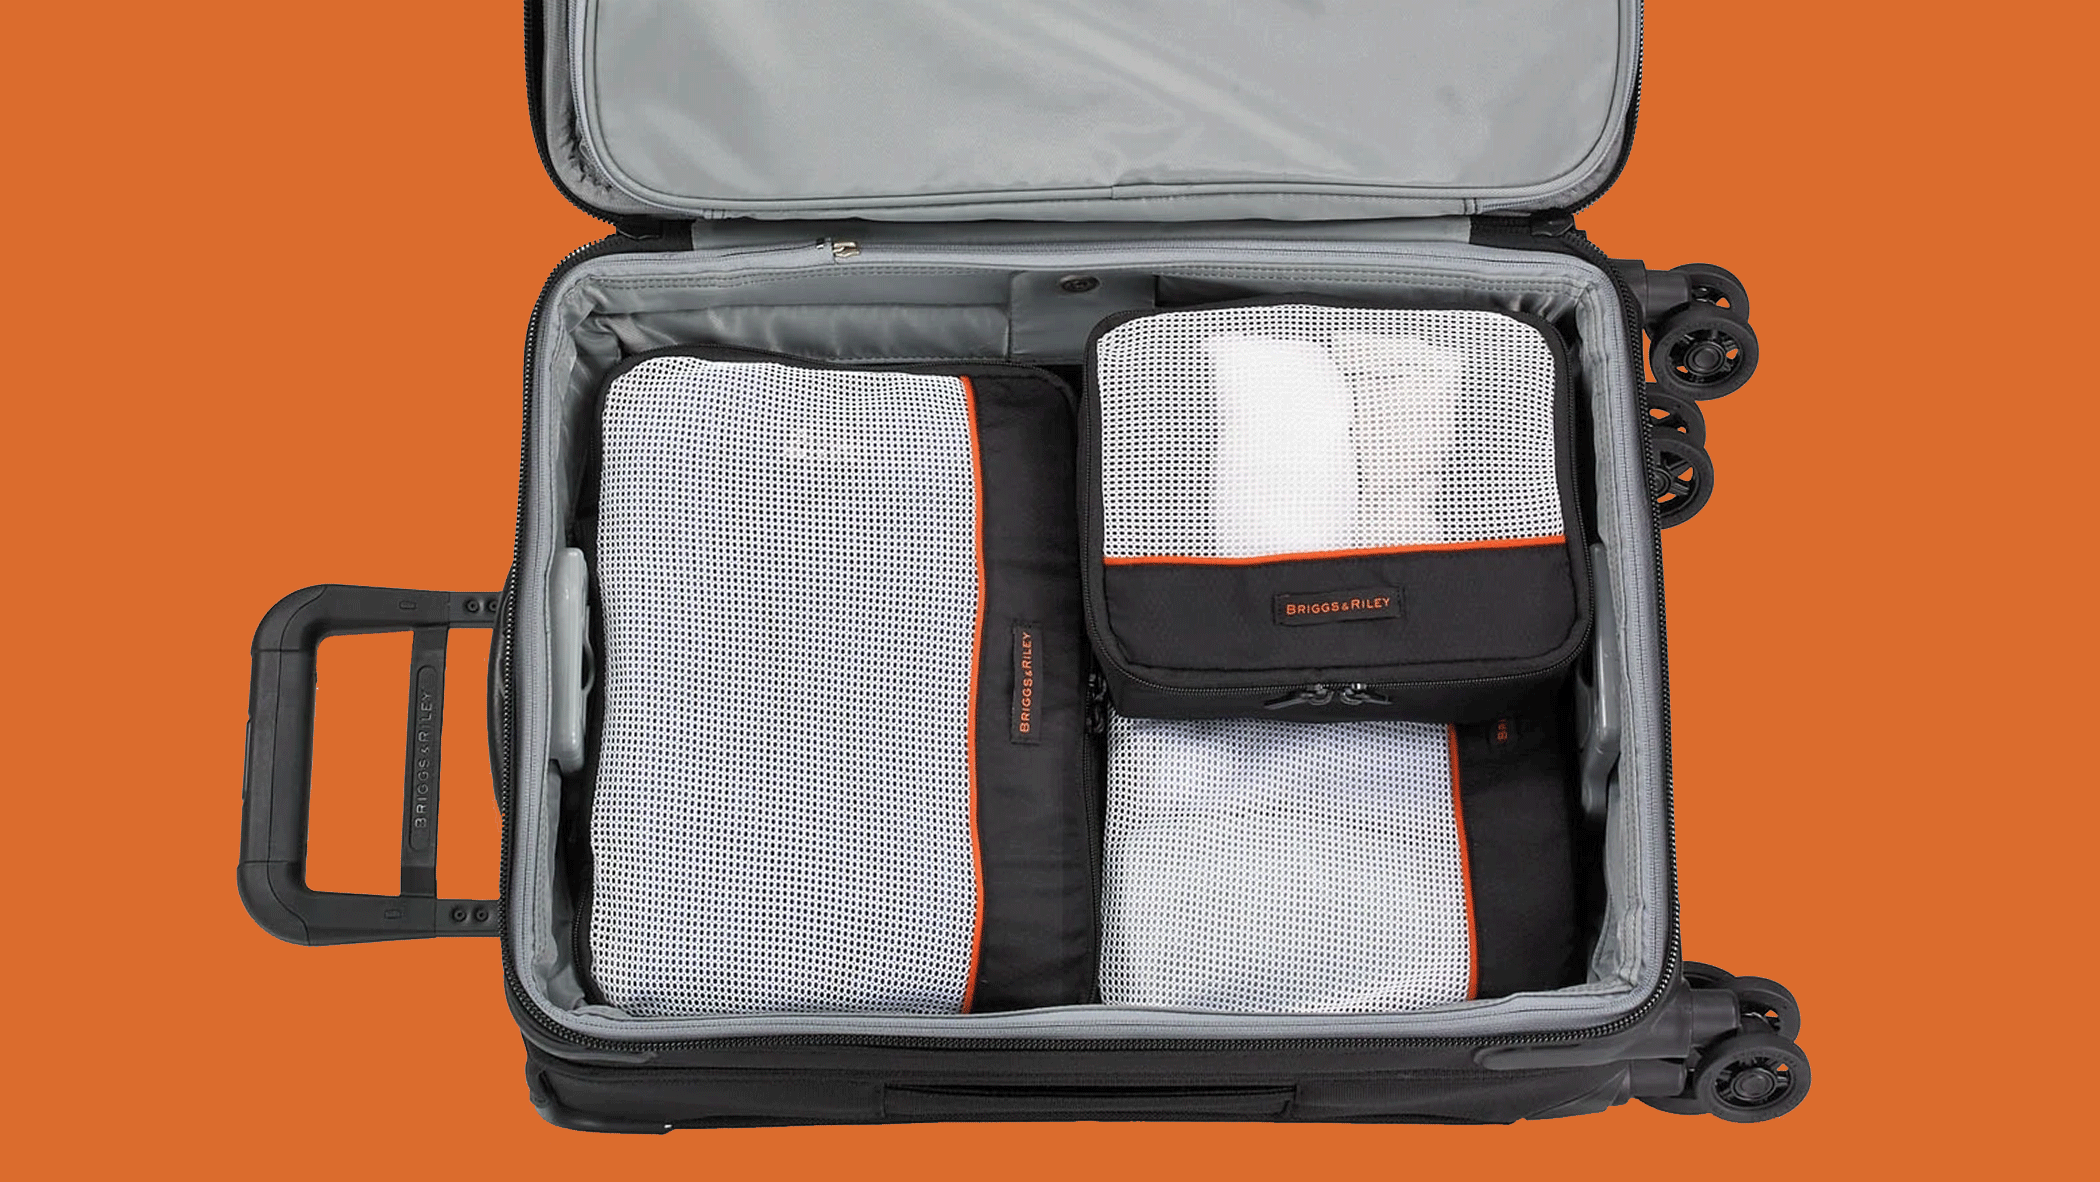 Packing Cubes Guide: How to Choose & Use Packing Cubes